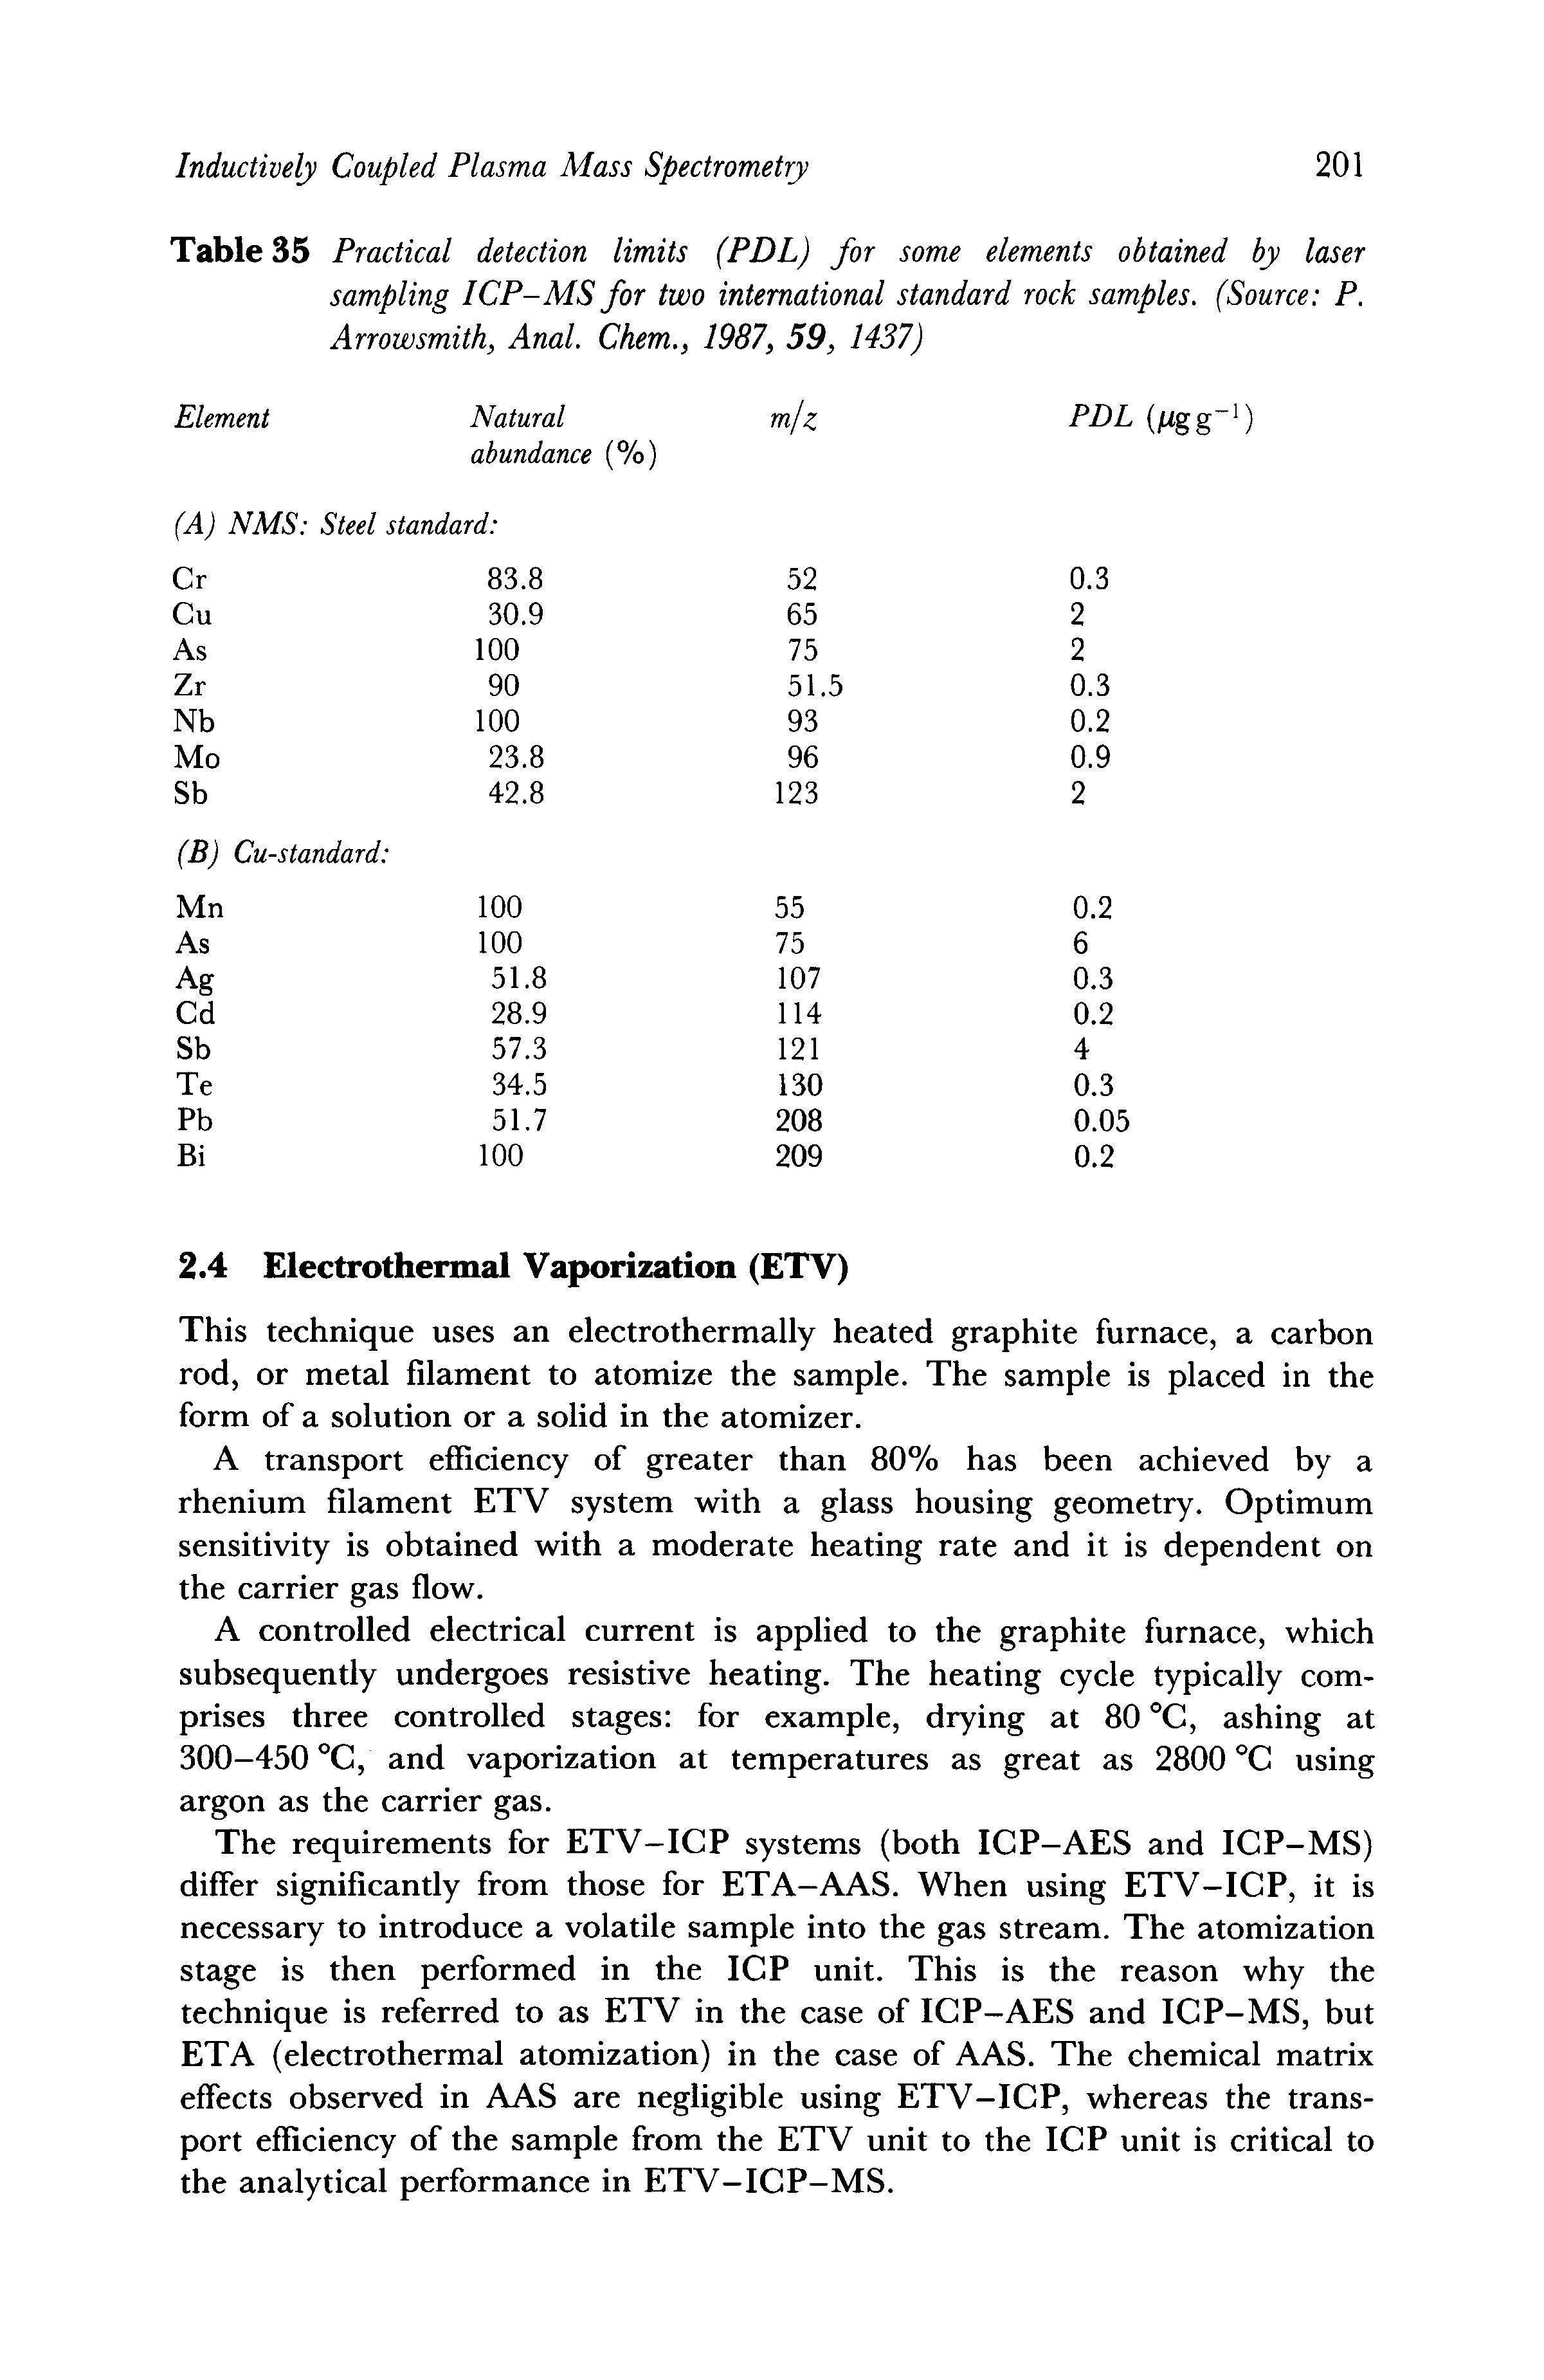 Table 35 Practical detection limits (PDL) for some elements obtained by laser sampling ICP-MS for two international standard rock samples. (Source P. Arrowsmith, Anal. Chem., 1987, 59, 1437)...